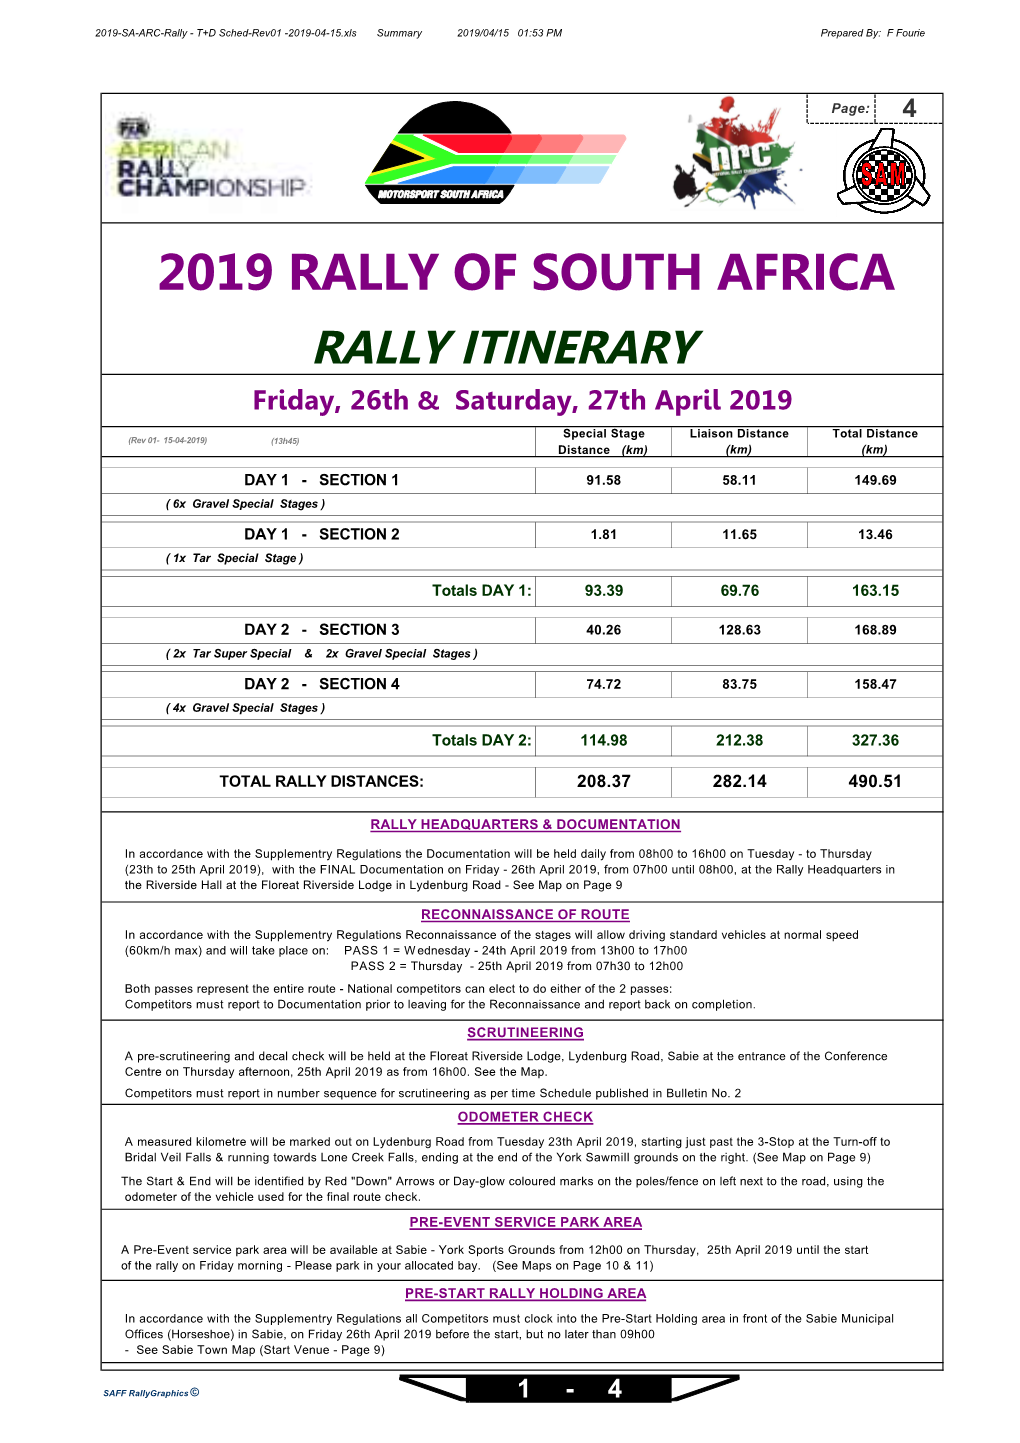 2019 RALLY of SOUTH AFRICA RALLY ITINERARY Friday, 26Th & Saturday, 27Th April 2019